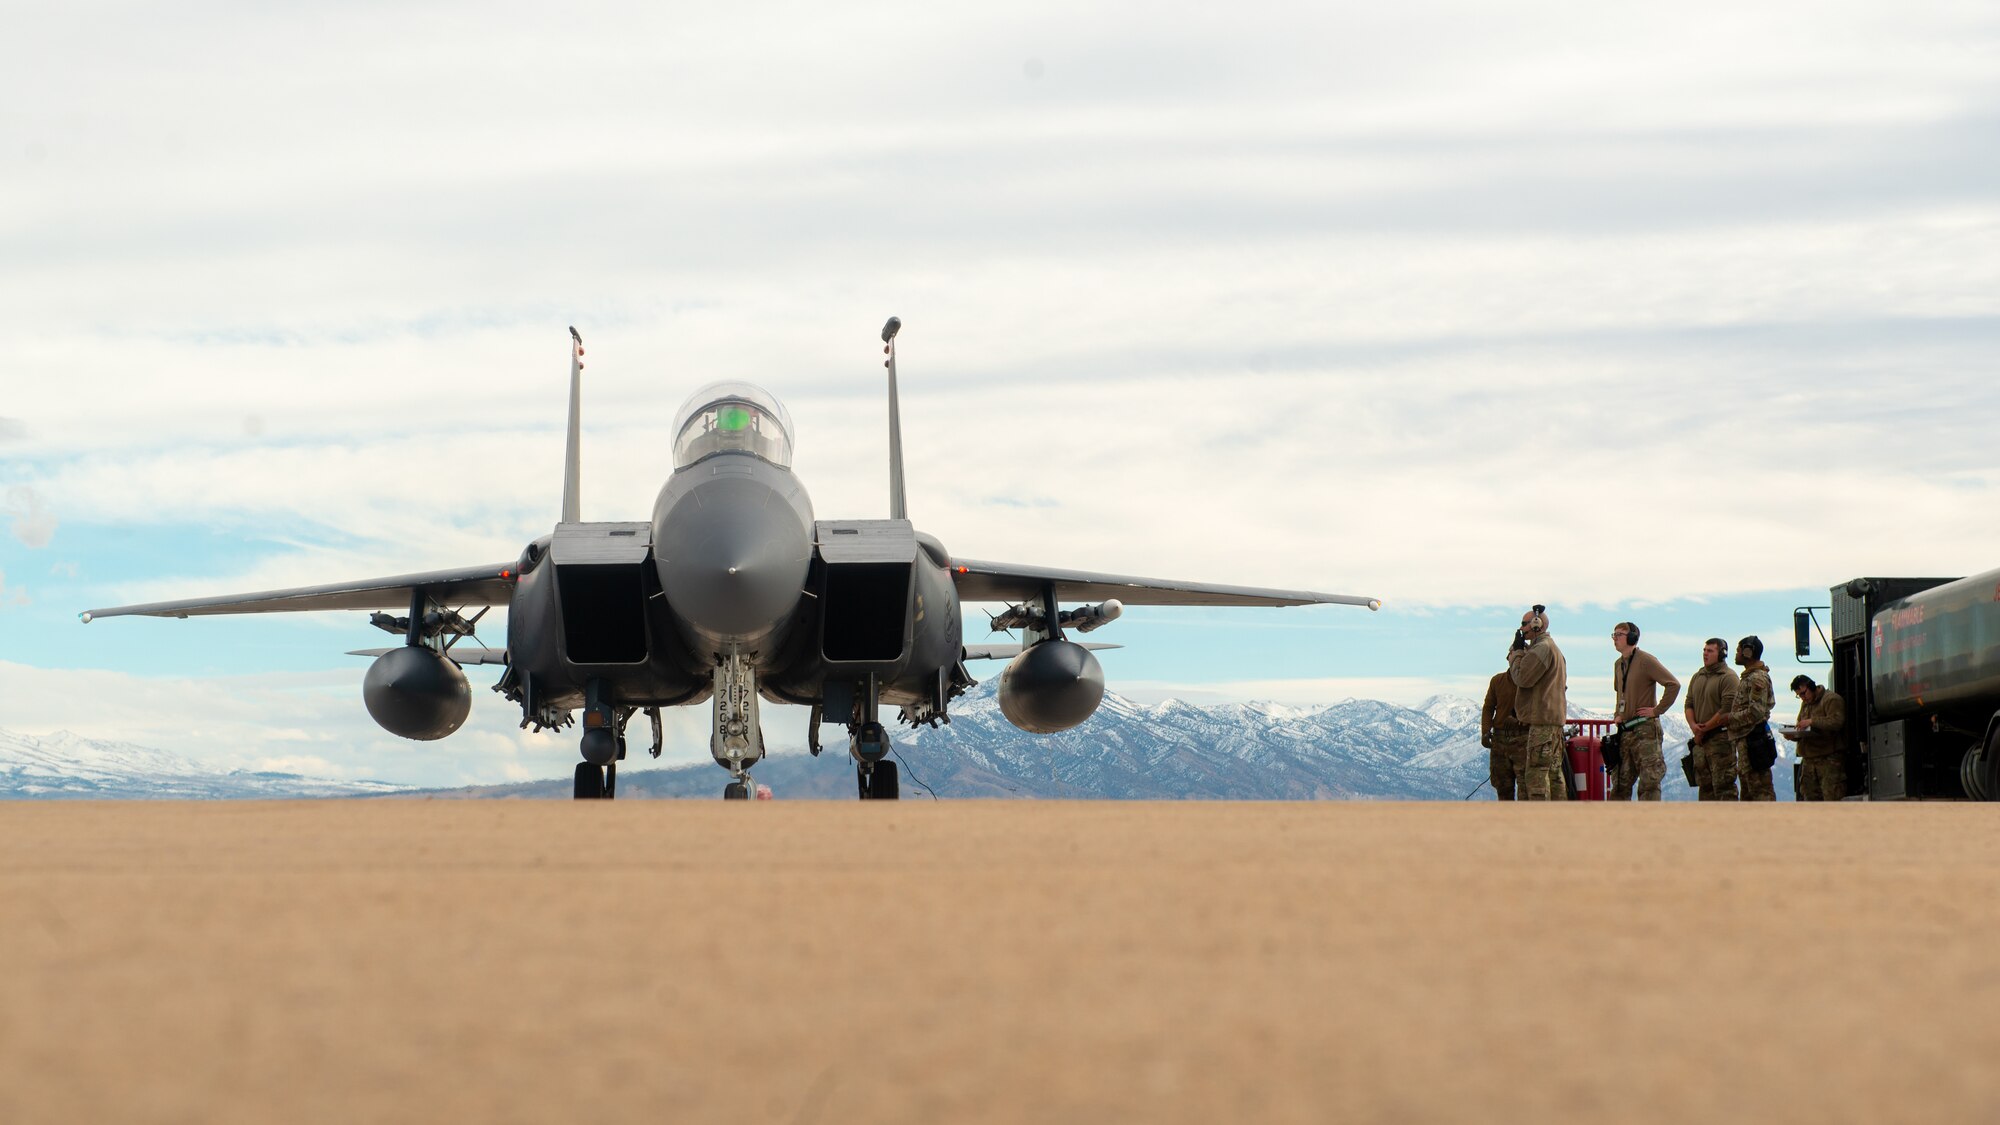 U.S. Air Force Airmen participate in exercise Raging Gunfighter at Michael Army Airfield, Utah, Feb. 1-4, 2020. This exercise furthered the multi-capabilities among Airmen and strengthened each other’s bond over the span of five days. (U.S. Air Force photo by JaNae Capuno)